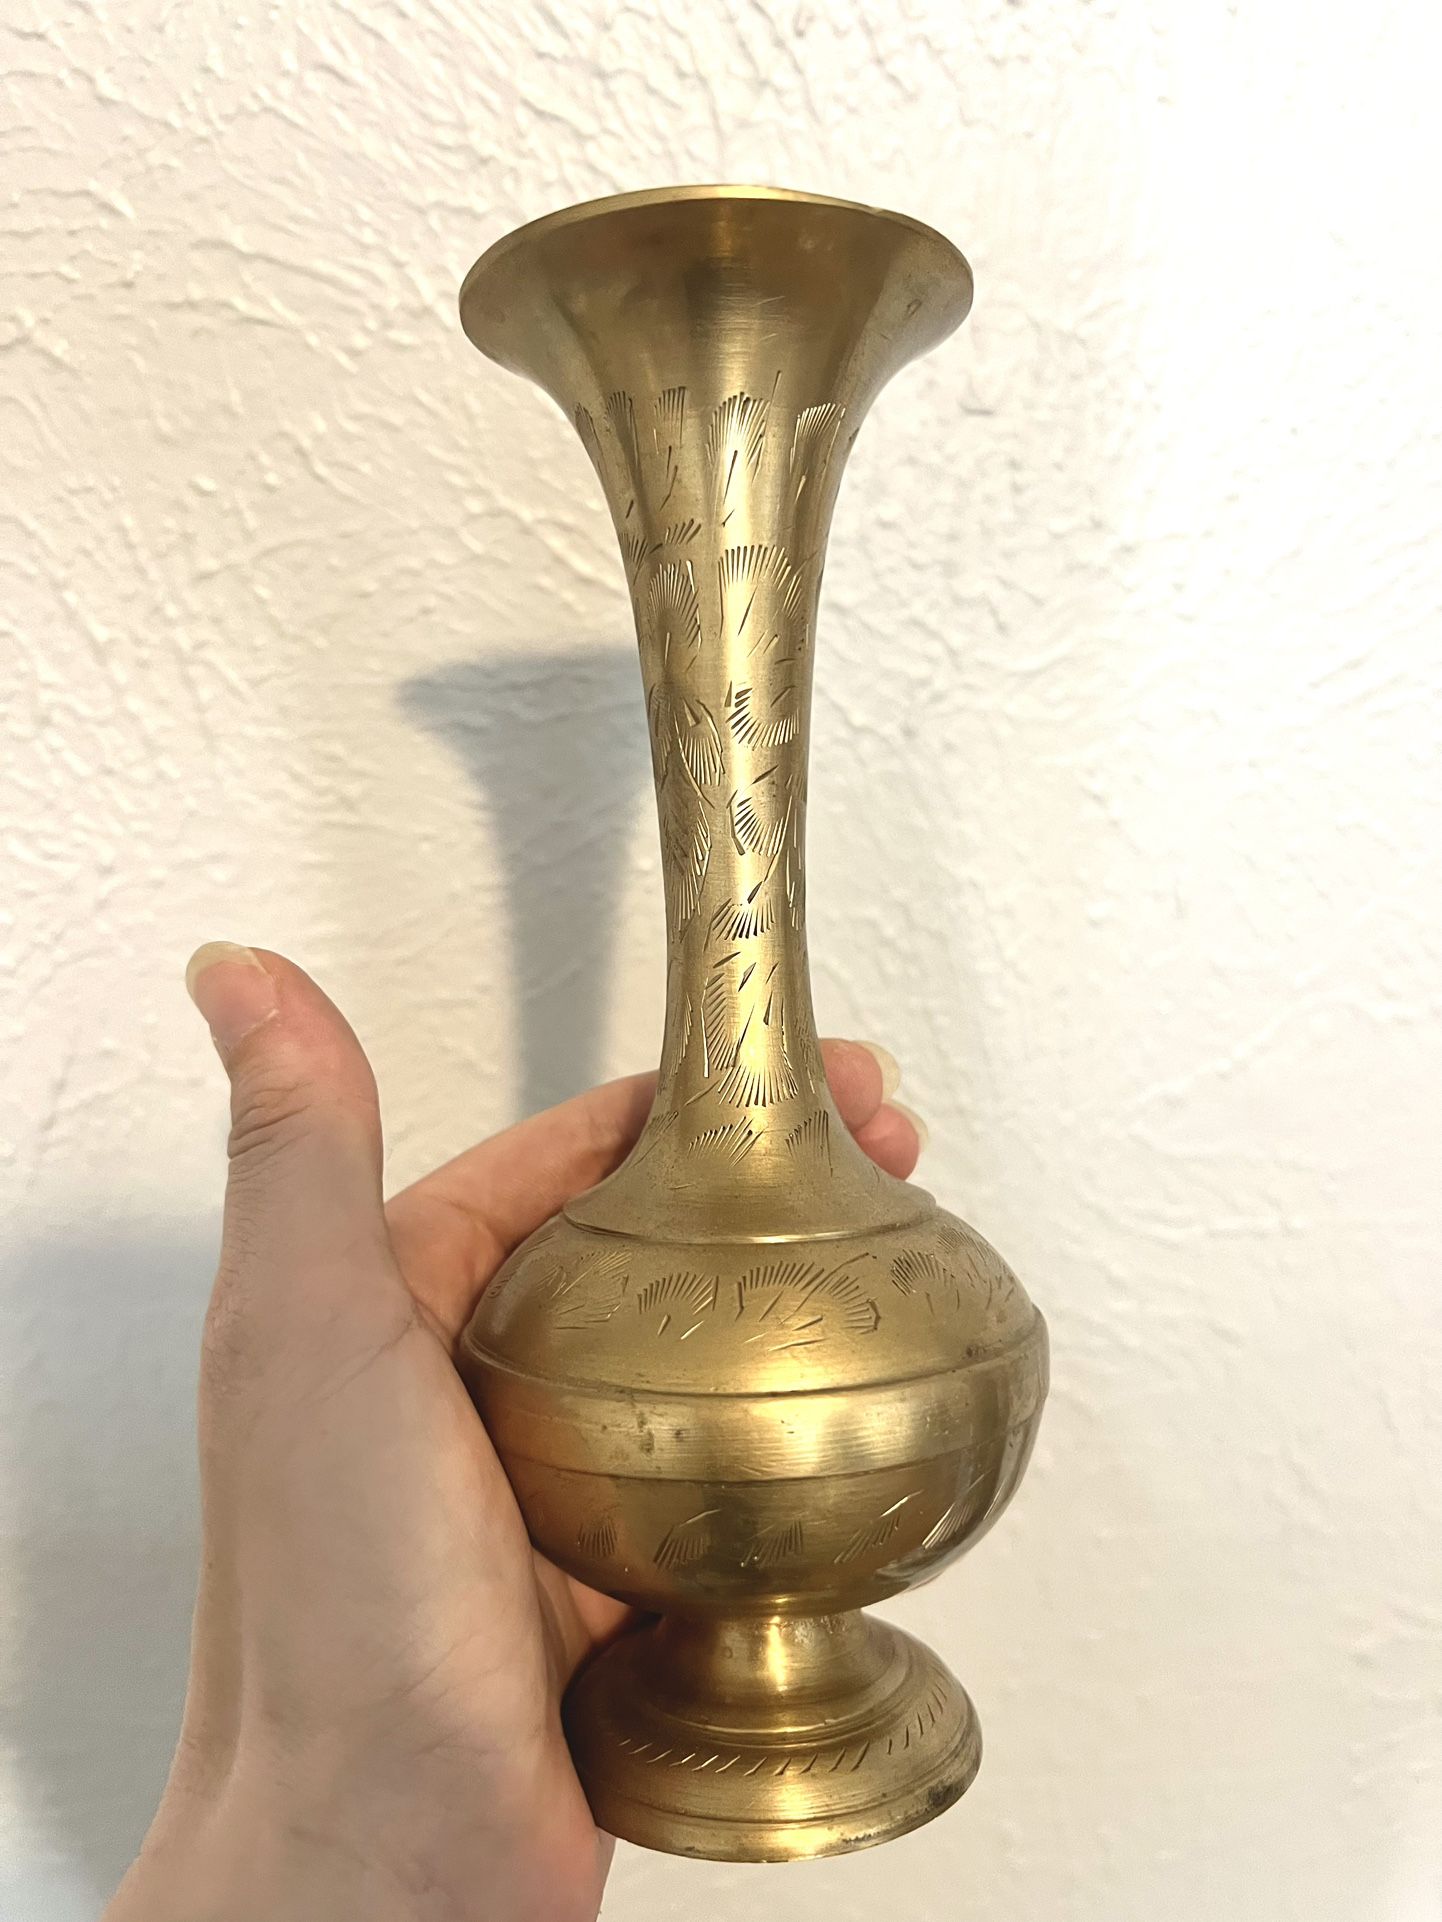 Amazing Condition: Vintage Mid Century Etched Brass Vase, made in India, 9” tall